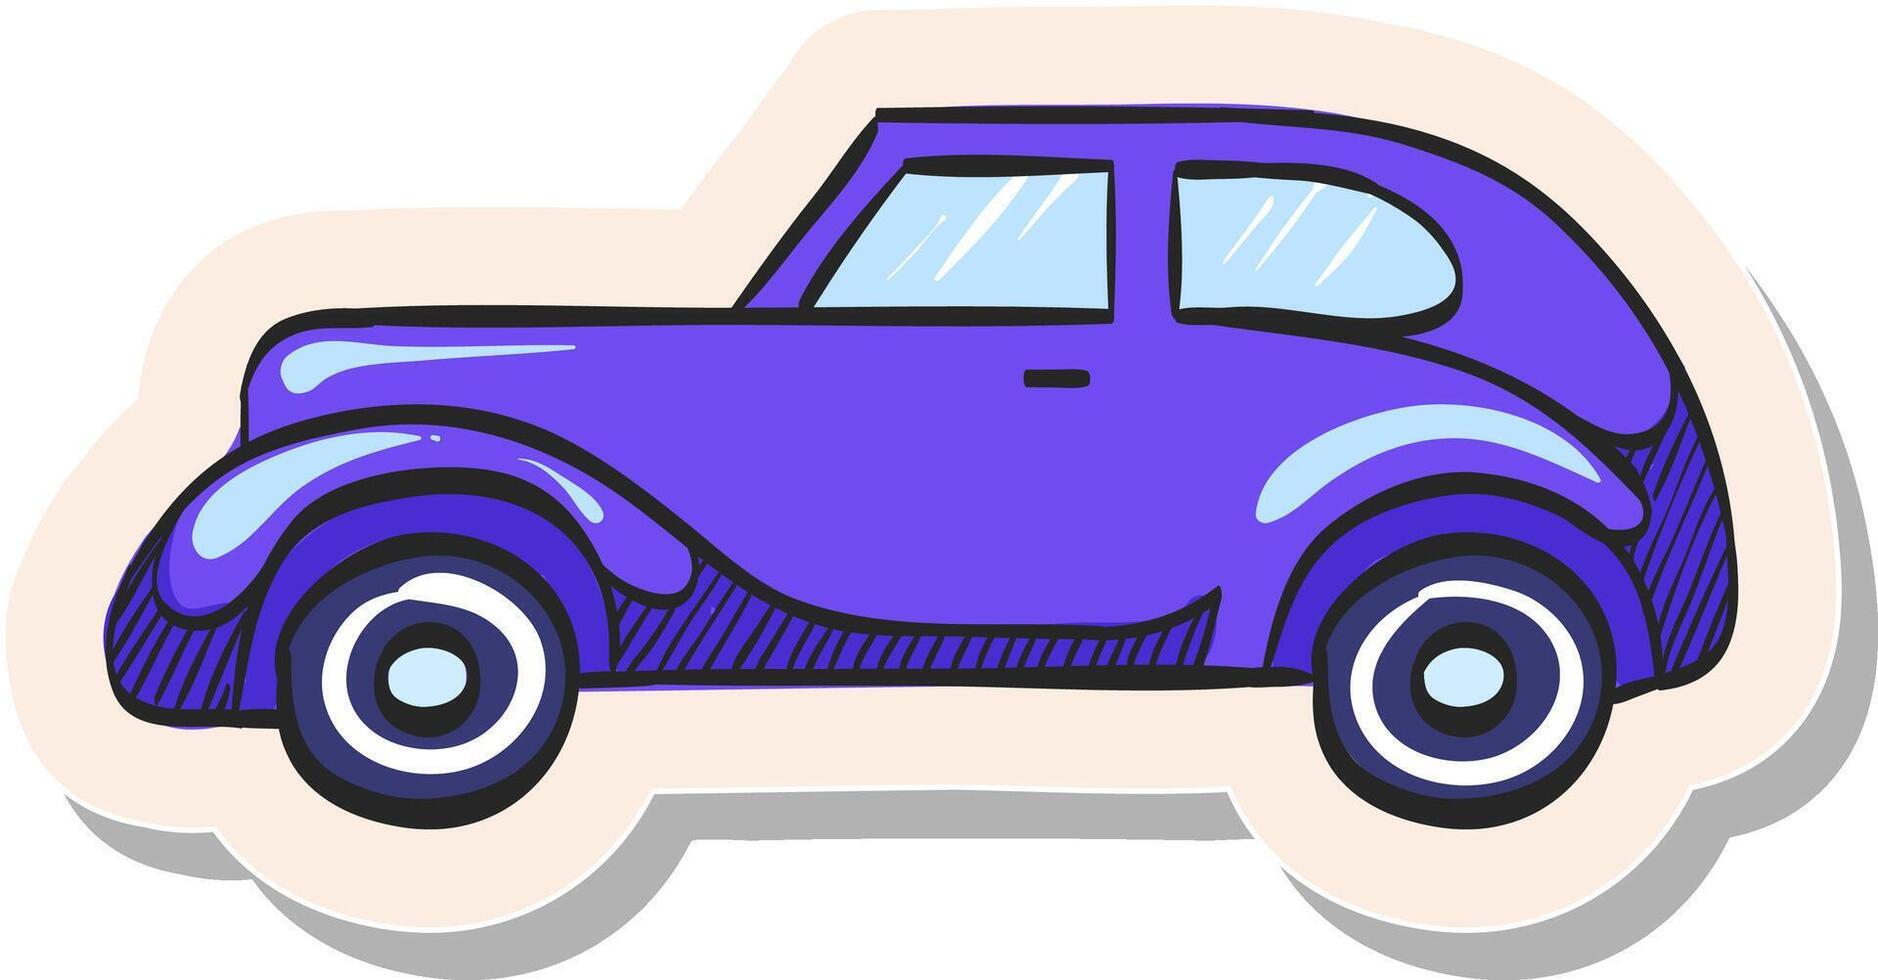 Hand drawn Vintage car icon in sticker style vector illustration